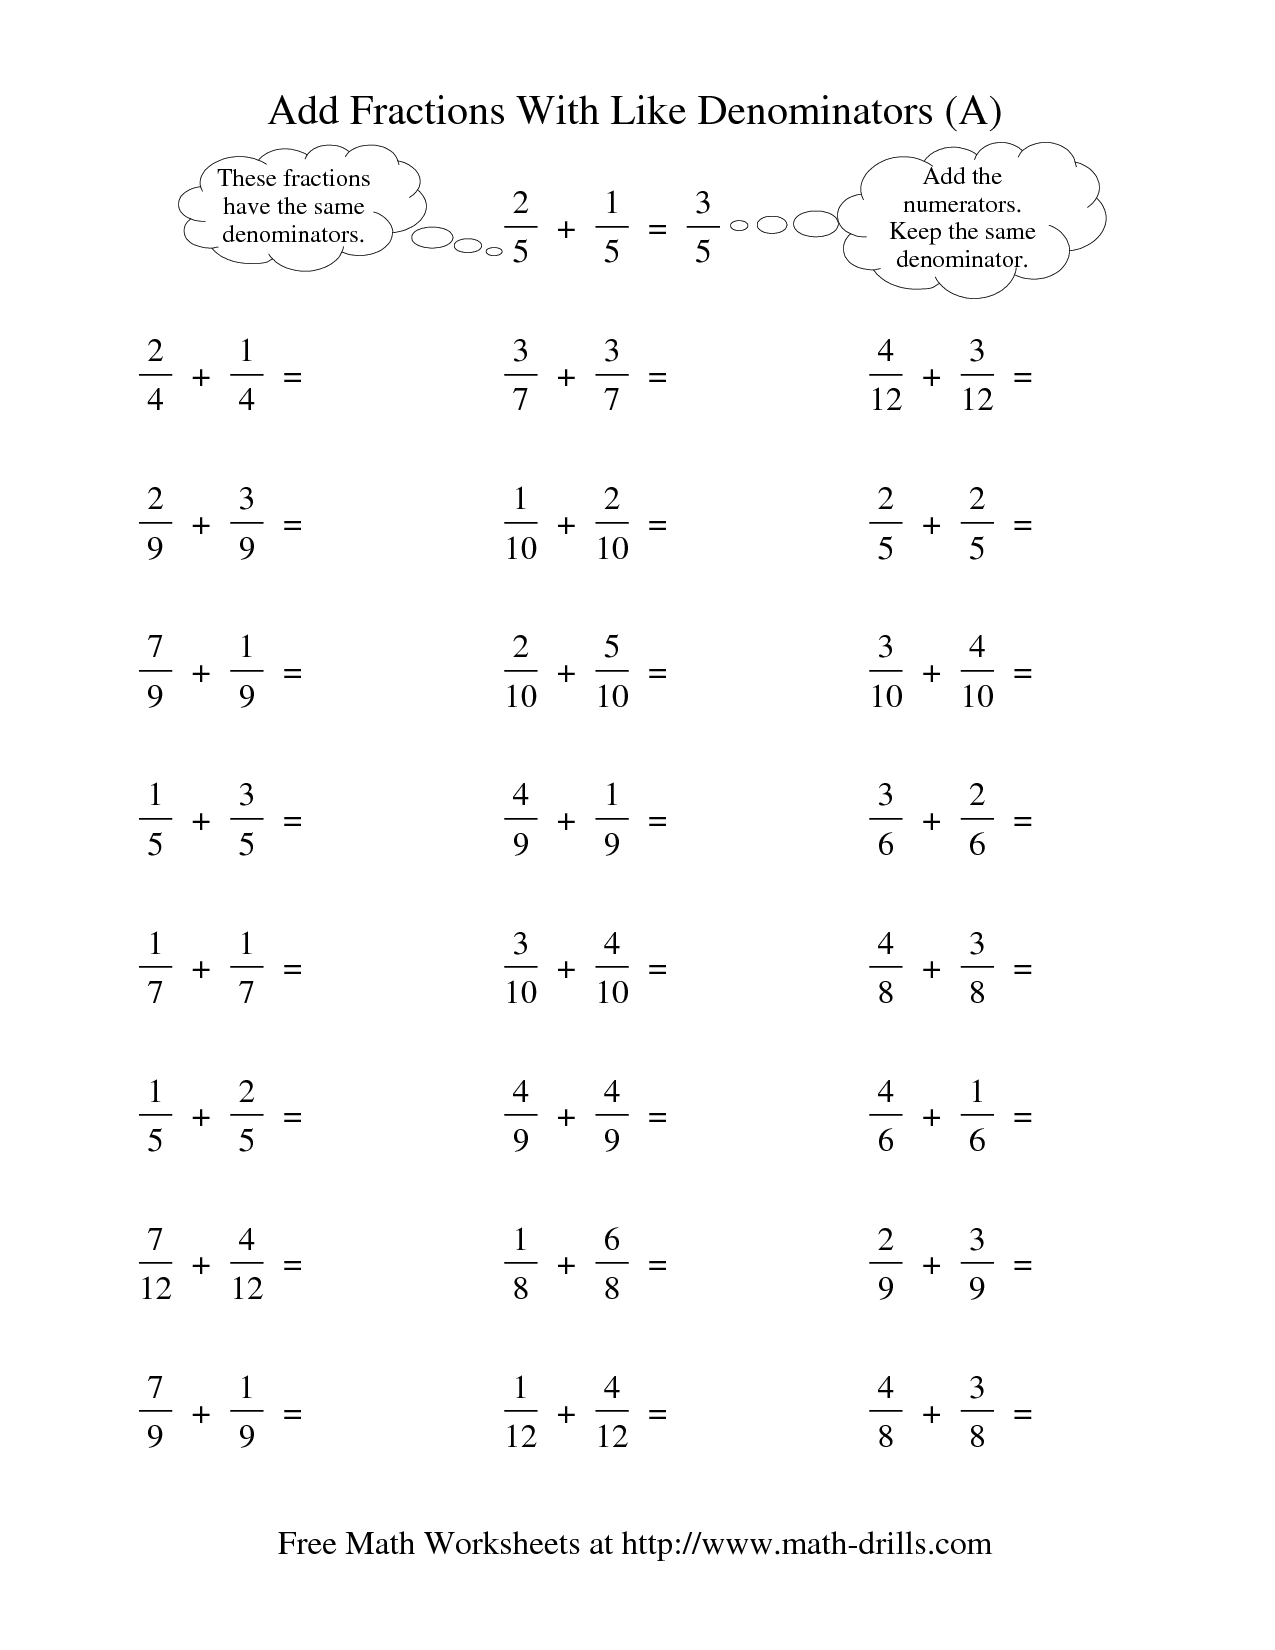 Worksheet On Addition Subtraction Multiplication And Division Of Fractions